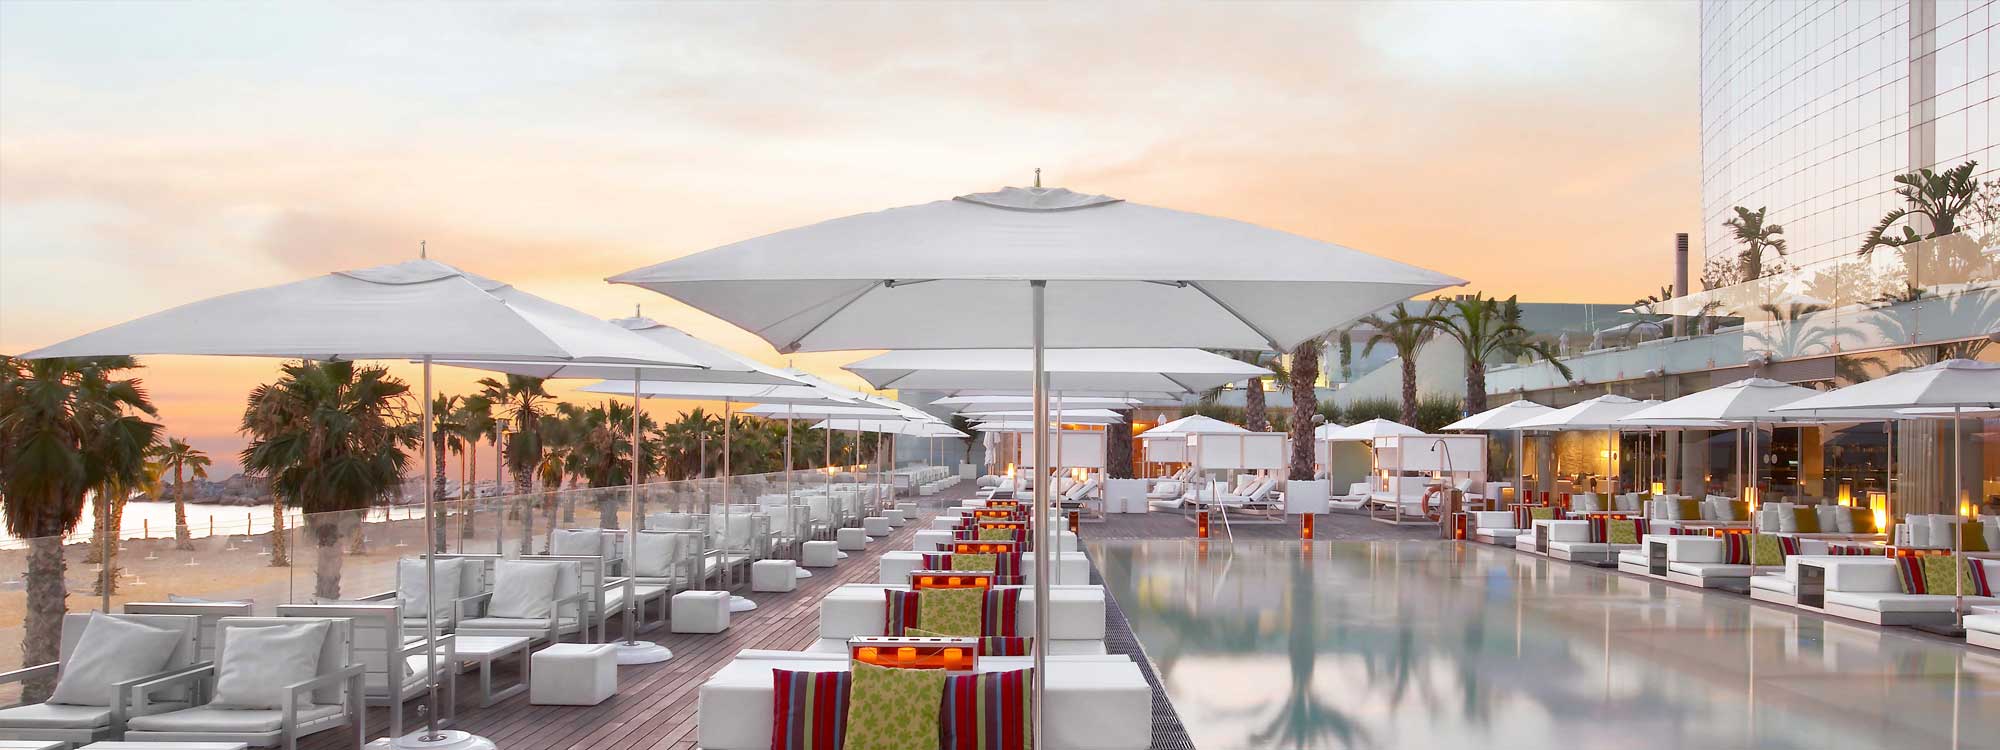 Image of white contract parasols on hotel poolside lounge area